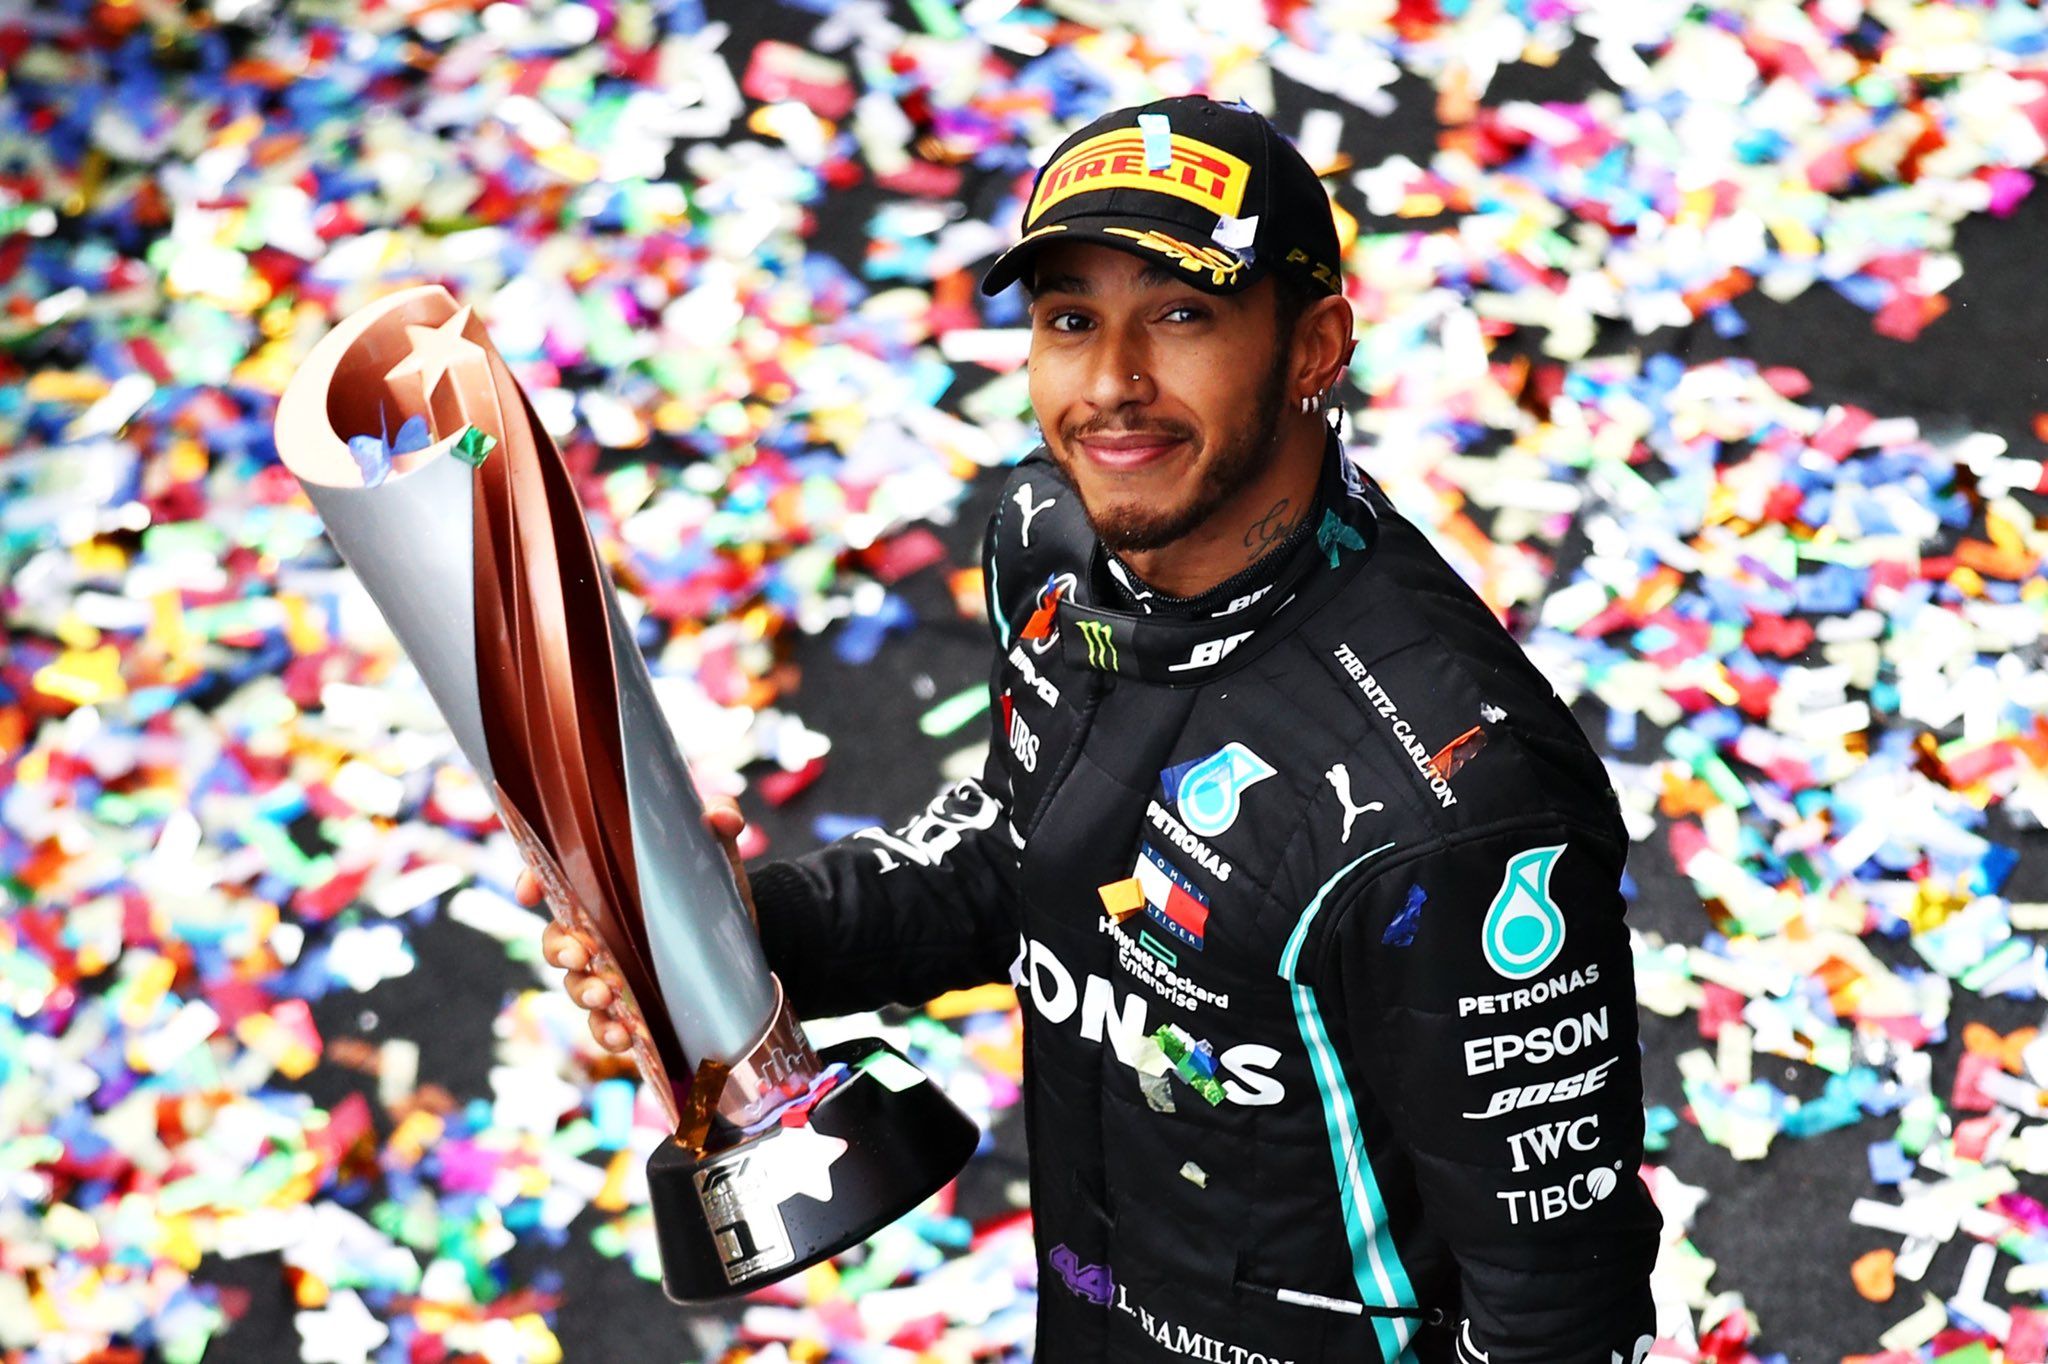 F1: Lewis Hamilton takes pole position for the sprint race in British Grand Prix